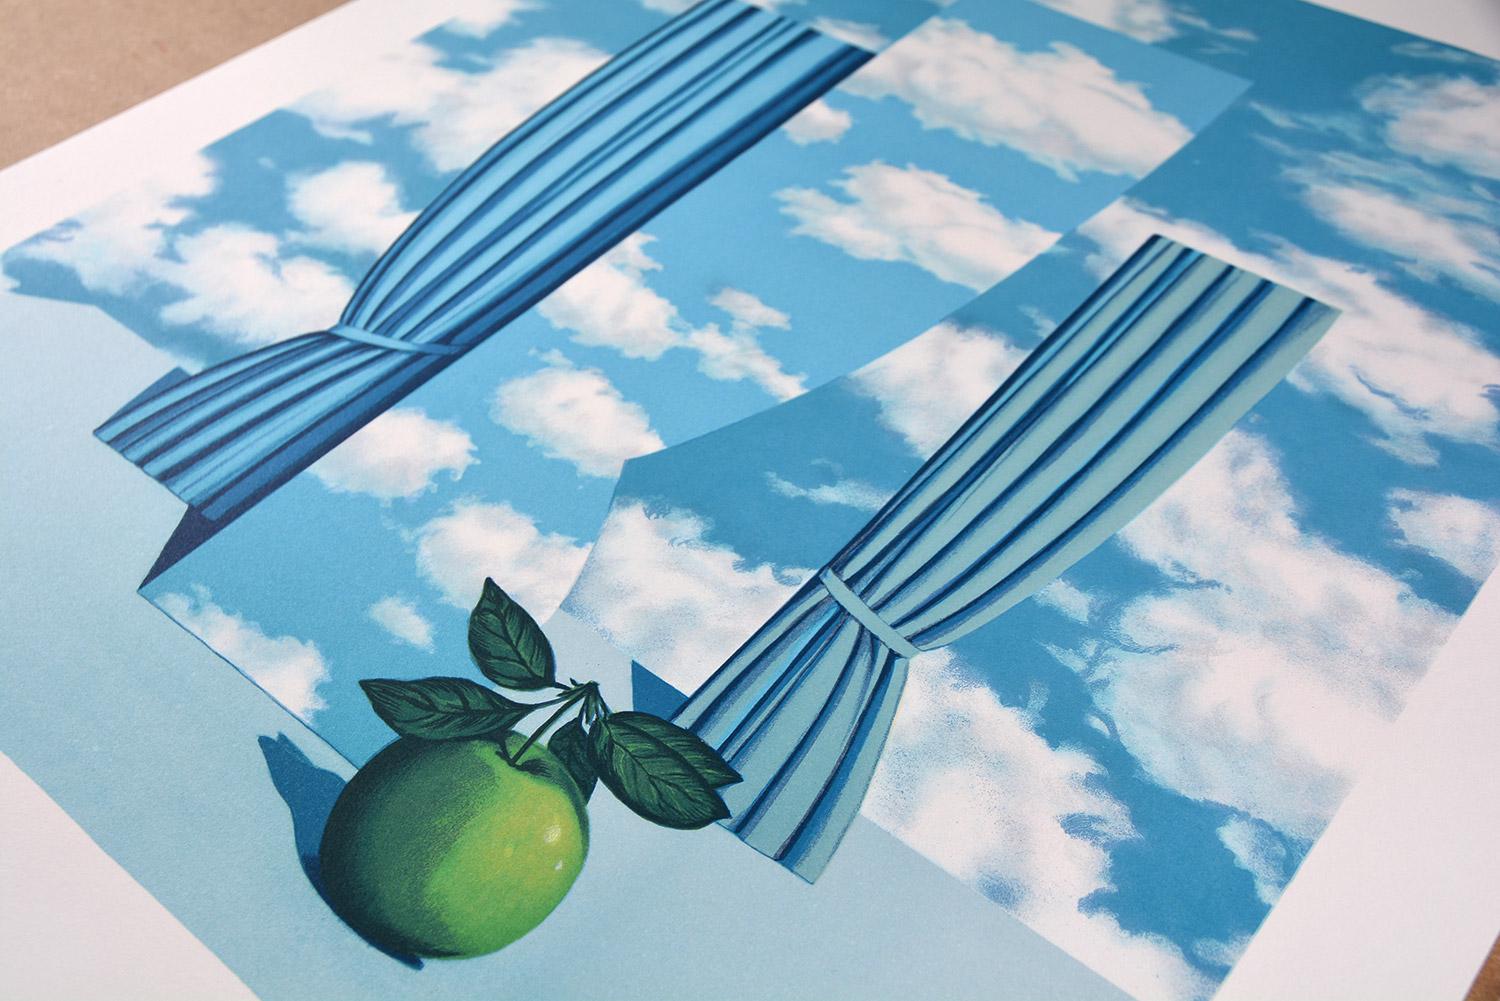 René Magritte - LE BEAU MONDE- Limited Lithograph Surrealism French Contemporary - Print by (after) René Magritte